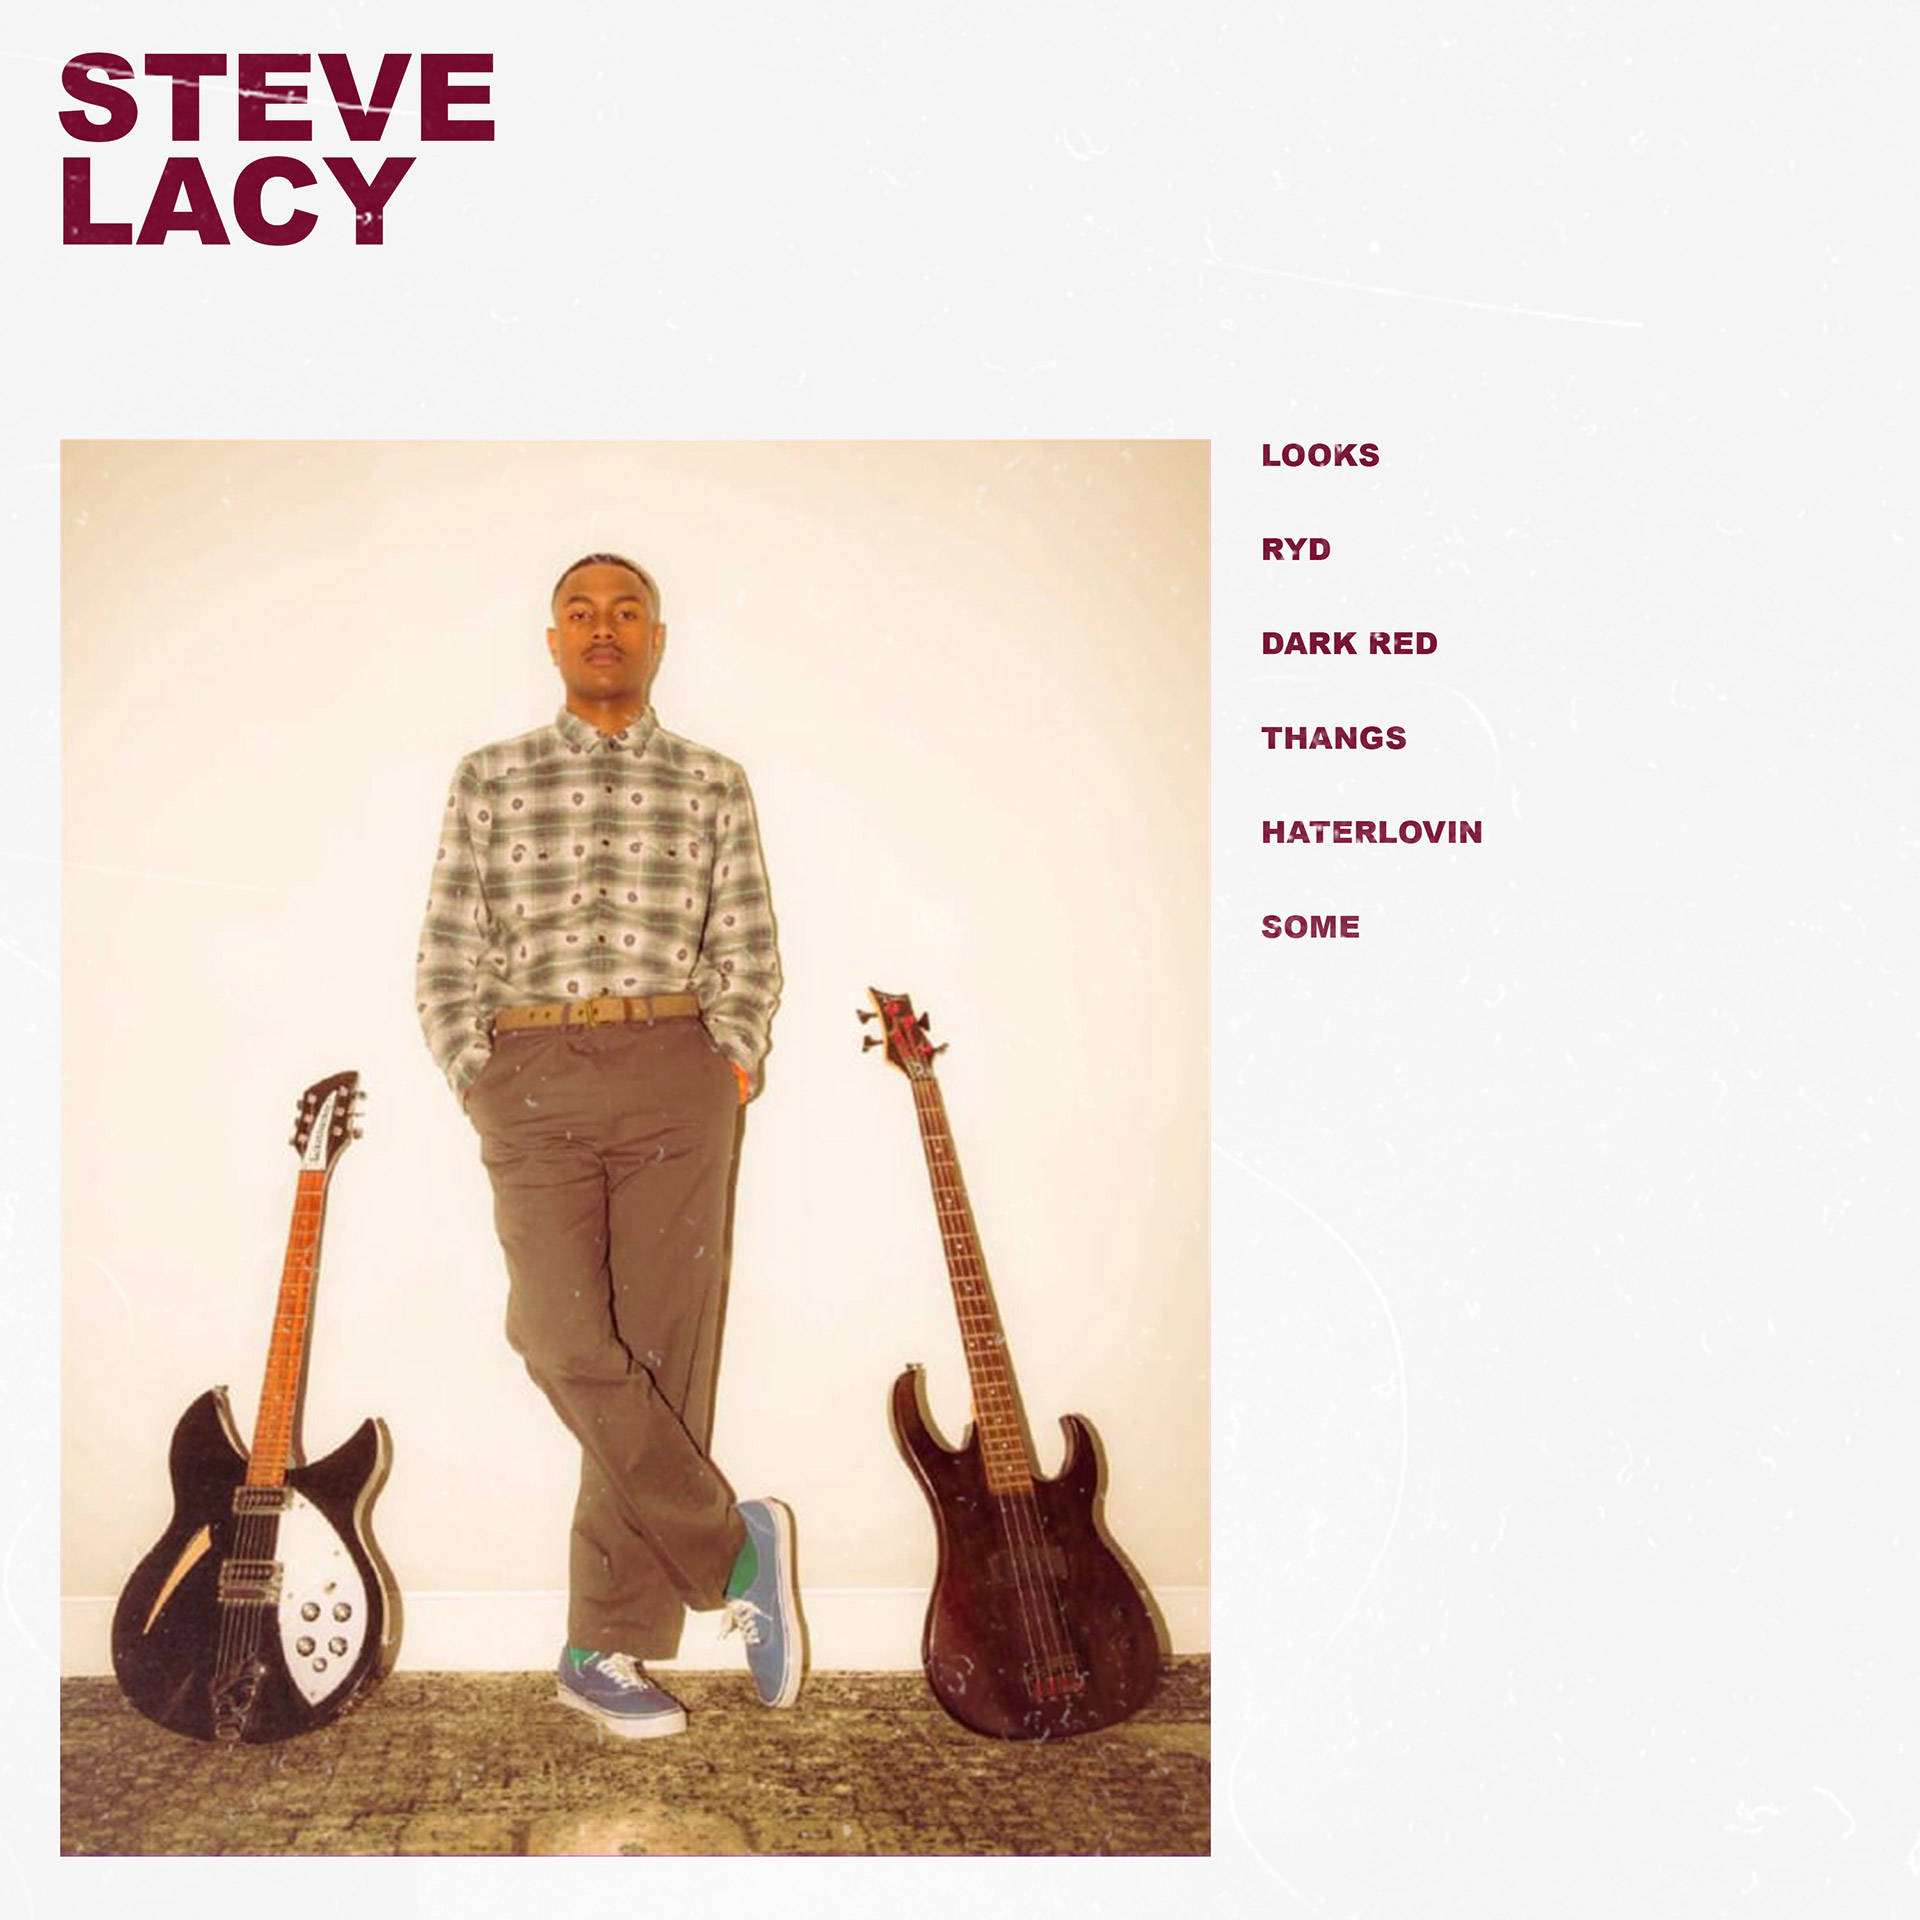 Steve Lacy Demo Poster